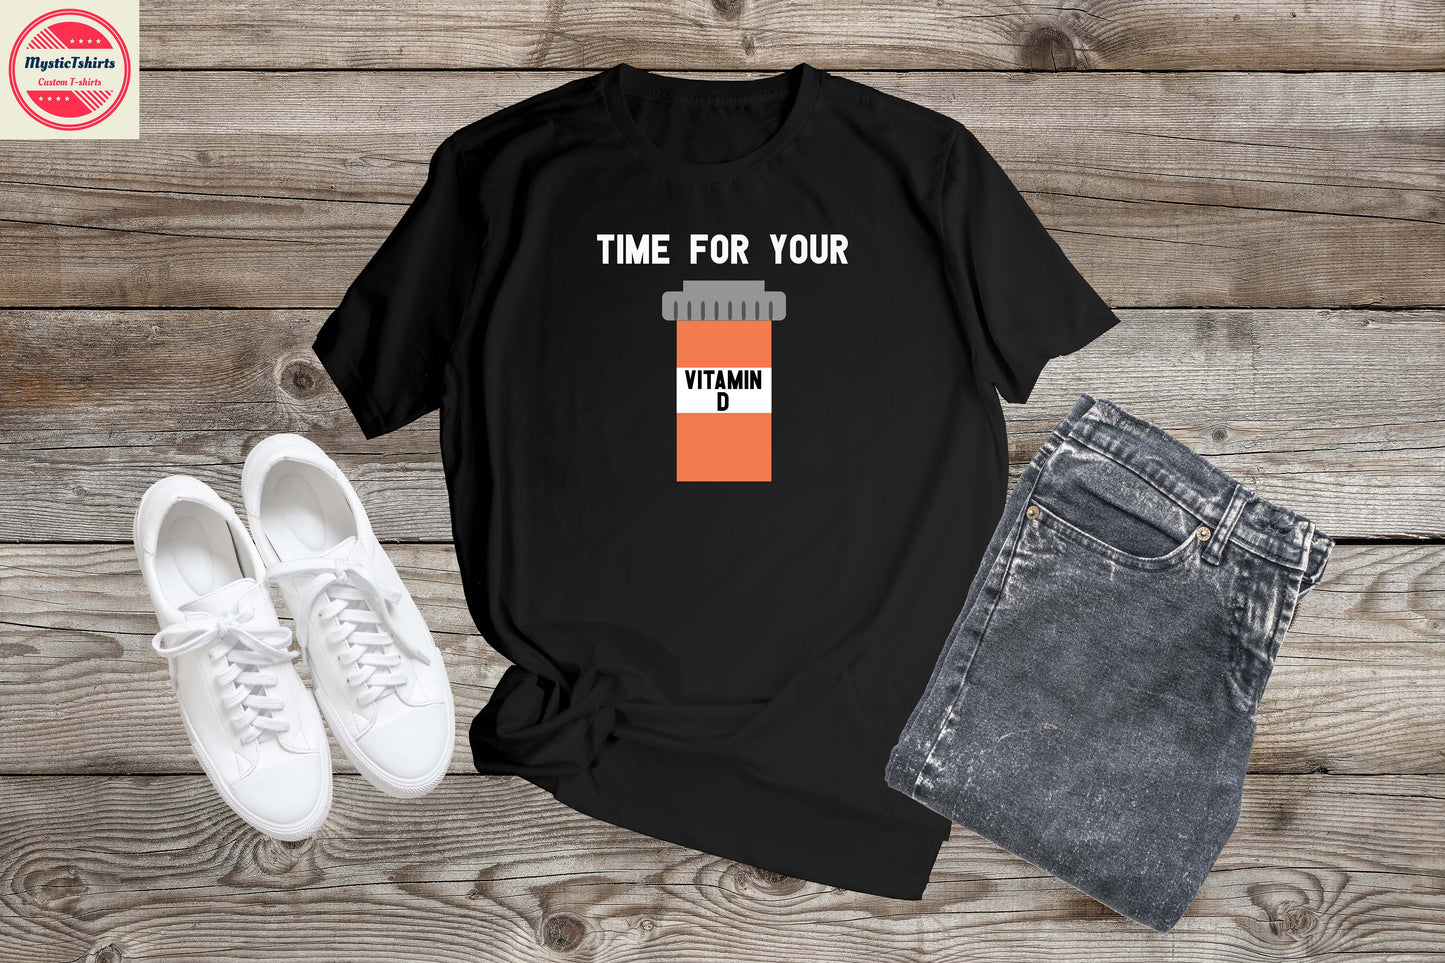 461. TIME FOR YOUR VITAMIN D, Personalized T-Shirt, Custom Text, Make Your Own Shirt, Custom Tee